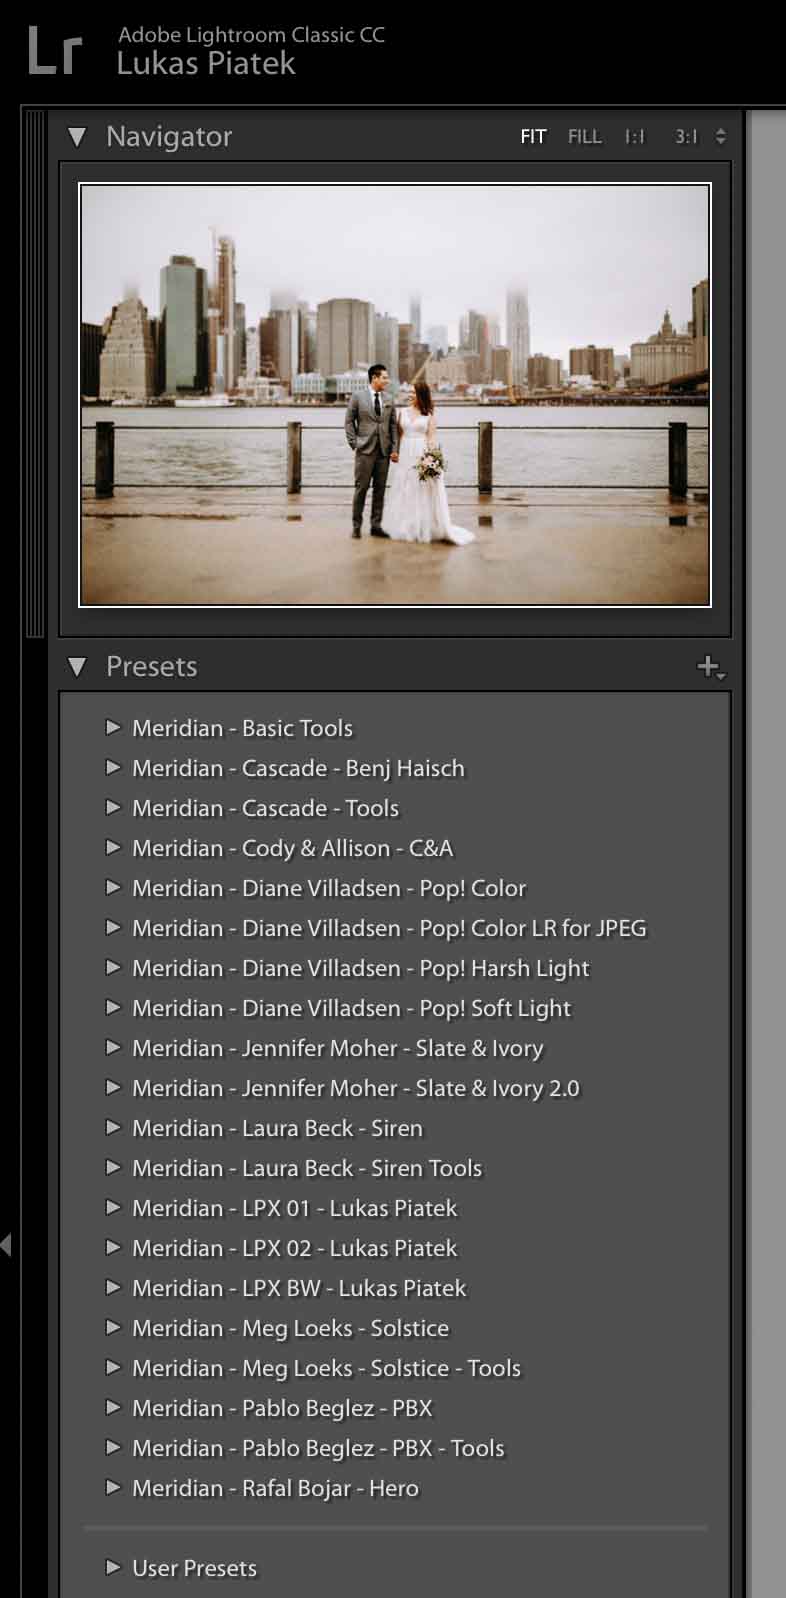 How to Install Presets in Lightroom?